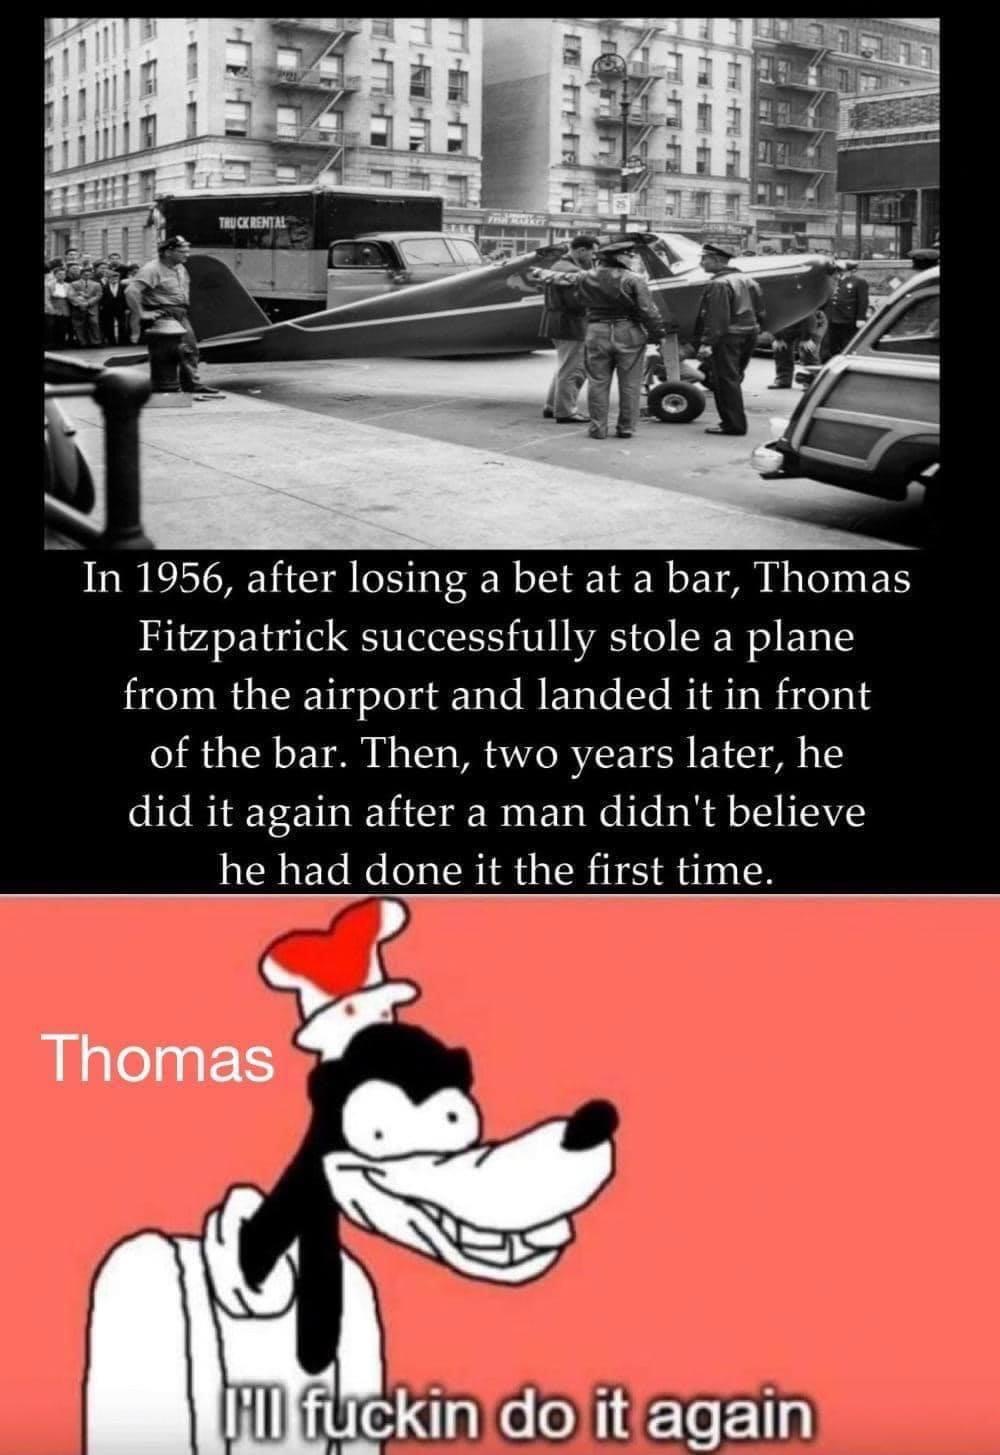 goofy i ll do it again - Truckrental In 1956, after losing a bet at a bar, Thomas Fitzpatrick successfully stole a plane from the airport and landed it in front of the bar. Then, two years later, he did it again after a man didn't believe he had done it t